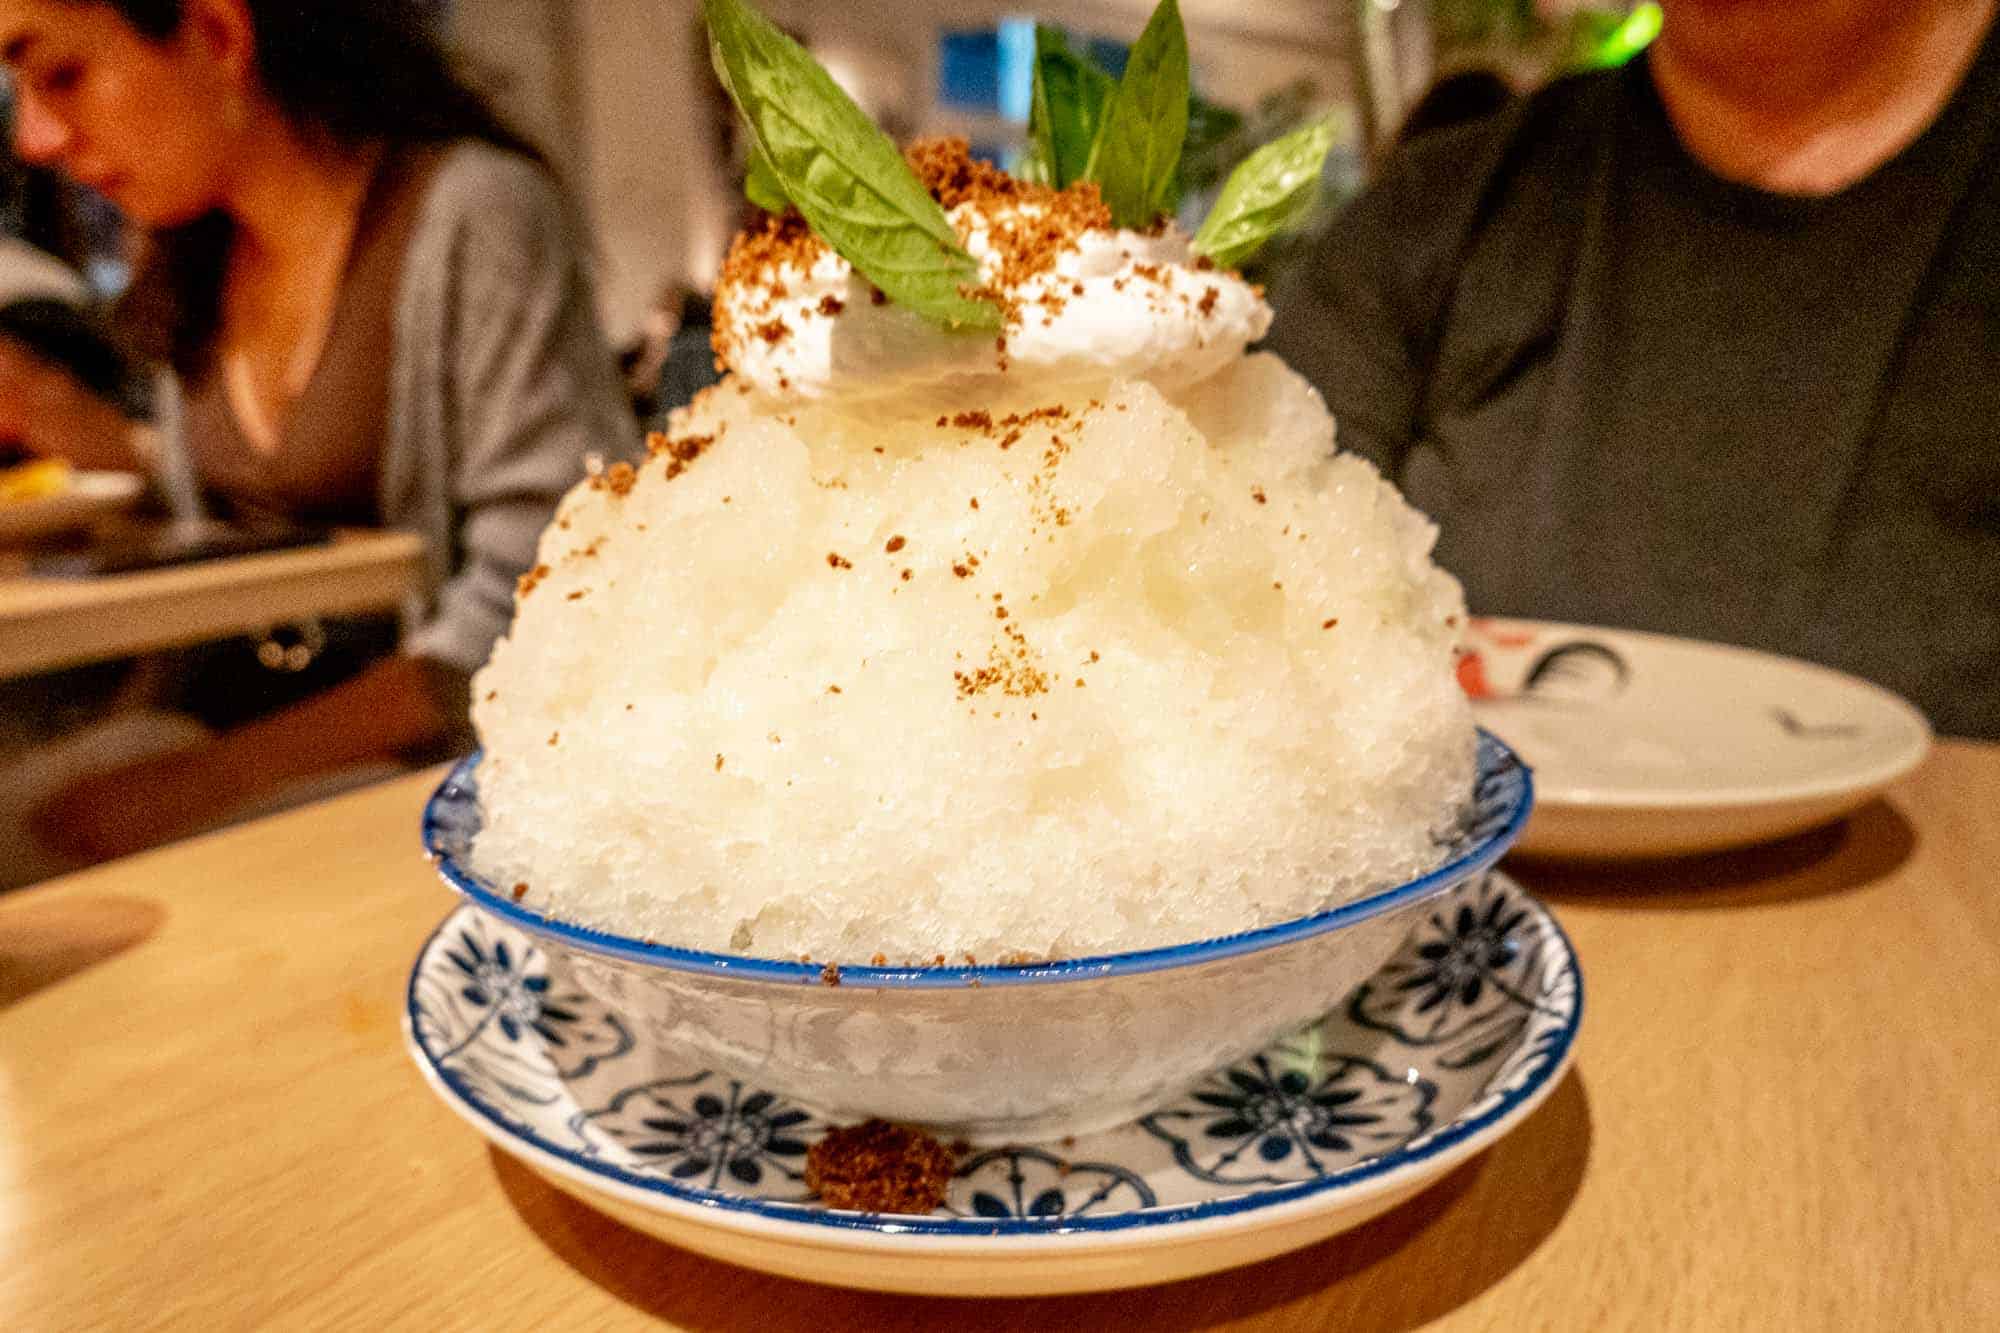 Shaved ice toped with cream and basil leaves.